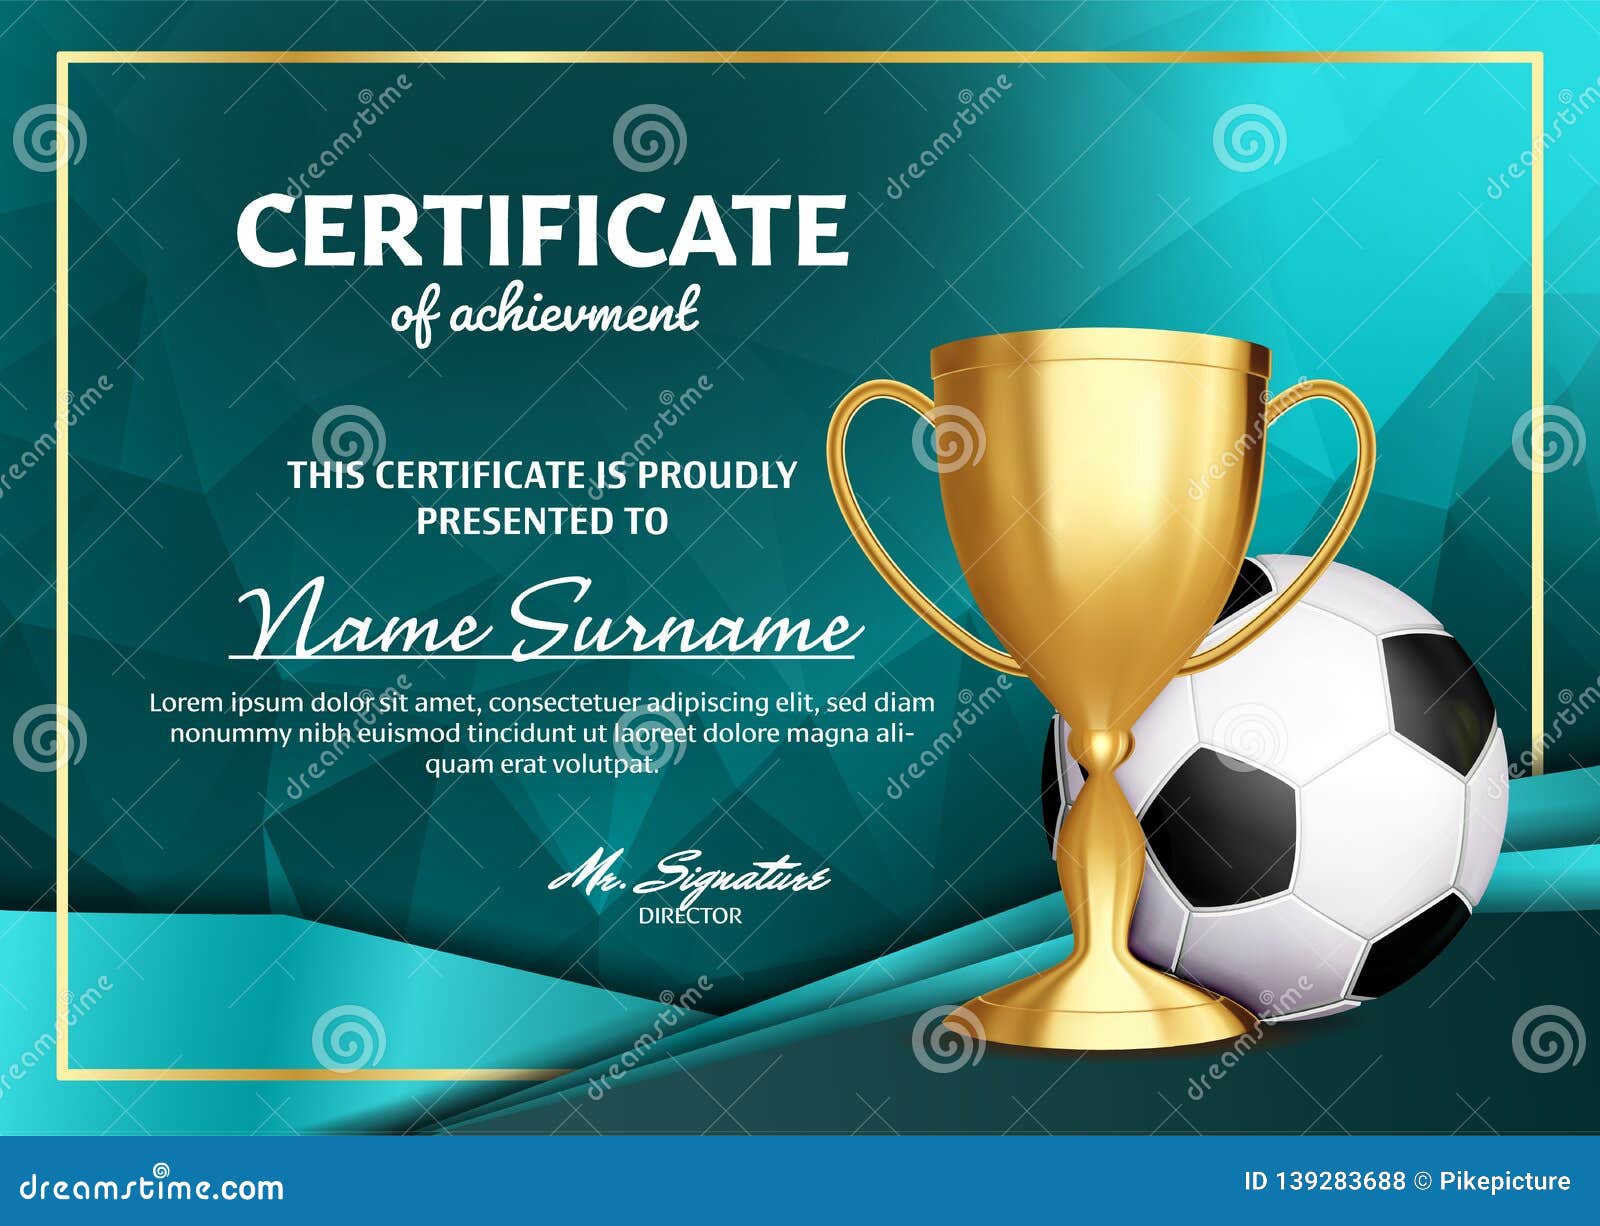 Soccer Certificate Diploma With Golden Cup Vector Football Sport Award Template Achievement Design Honor Background Stock Vector Illustration Of Modern Event 139283688